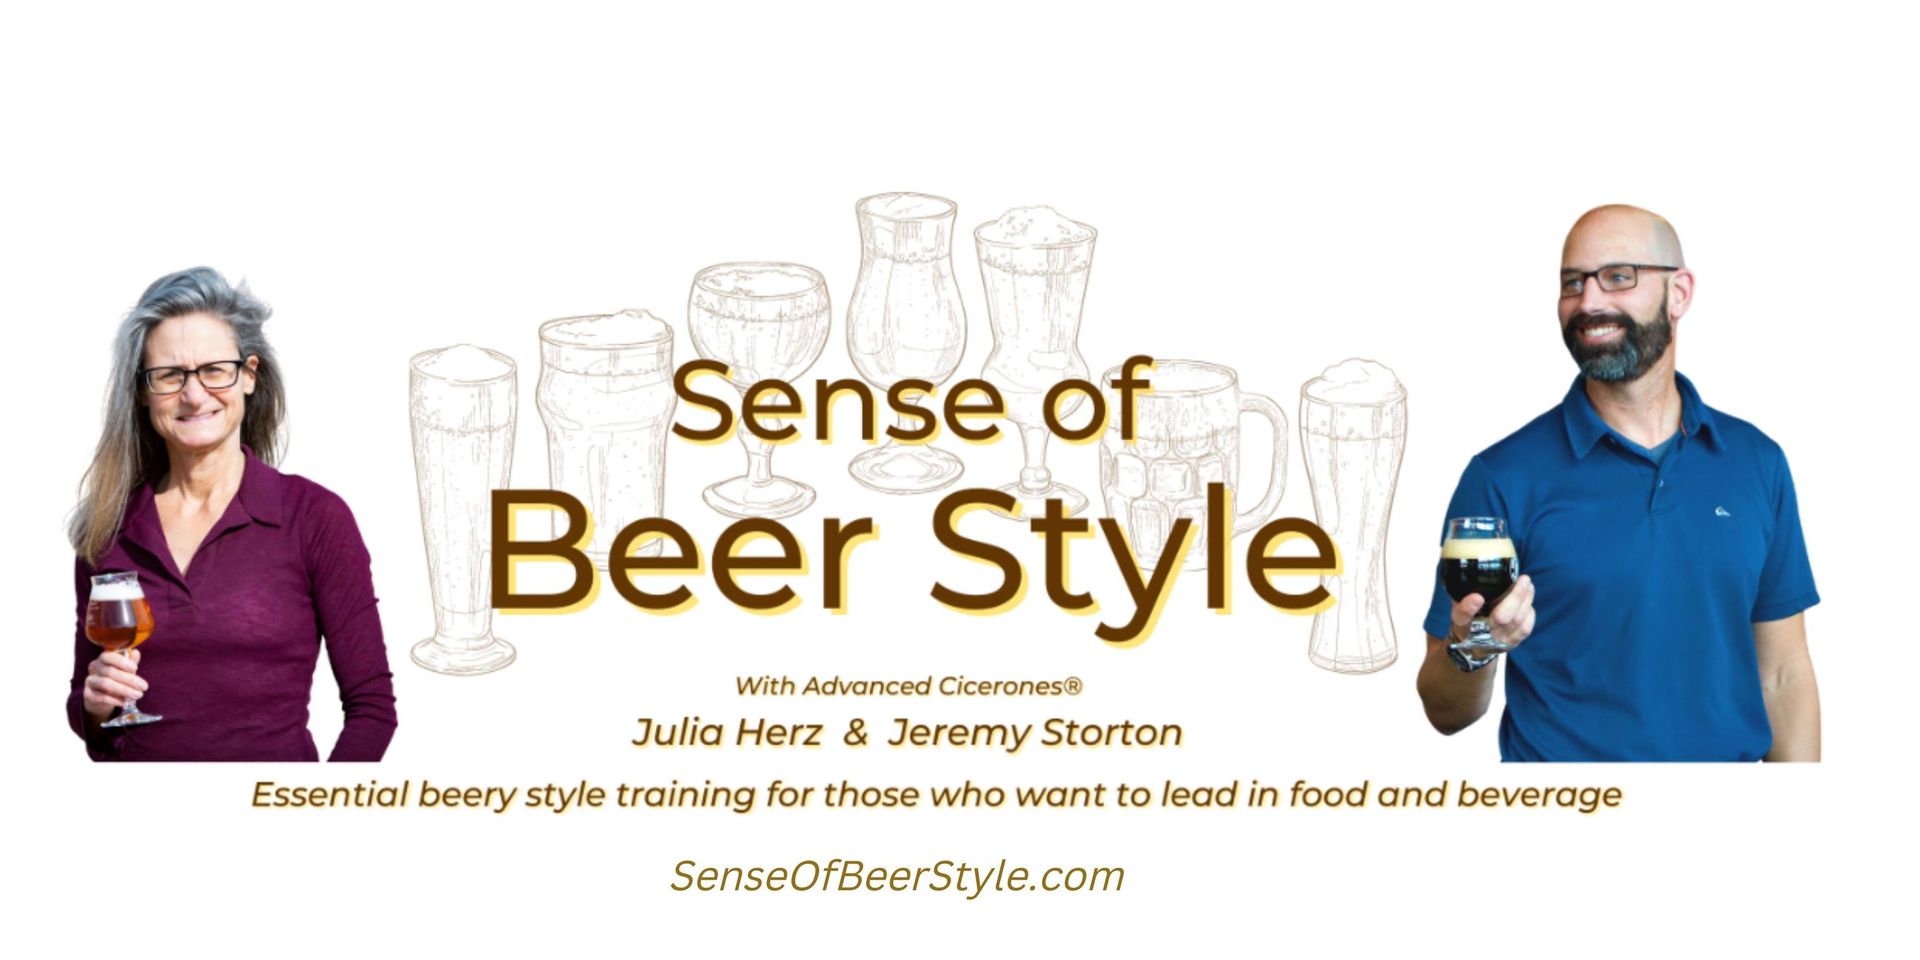 May be an image of 2 people, drink and text that says 'Sense of Beer Style With Advanced Cicerones® Julia Herz & Jeremy tortor Essential beery style training for those who want to lead in food and beverage SenseOfBeerStyle.com'